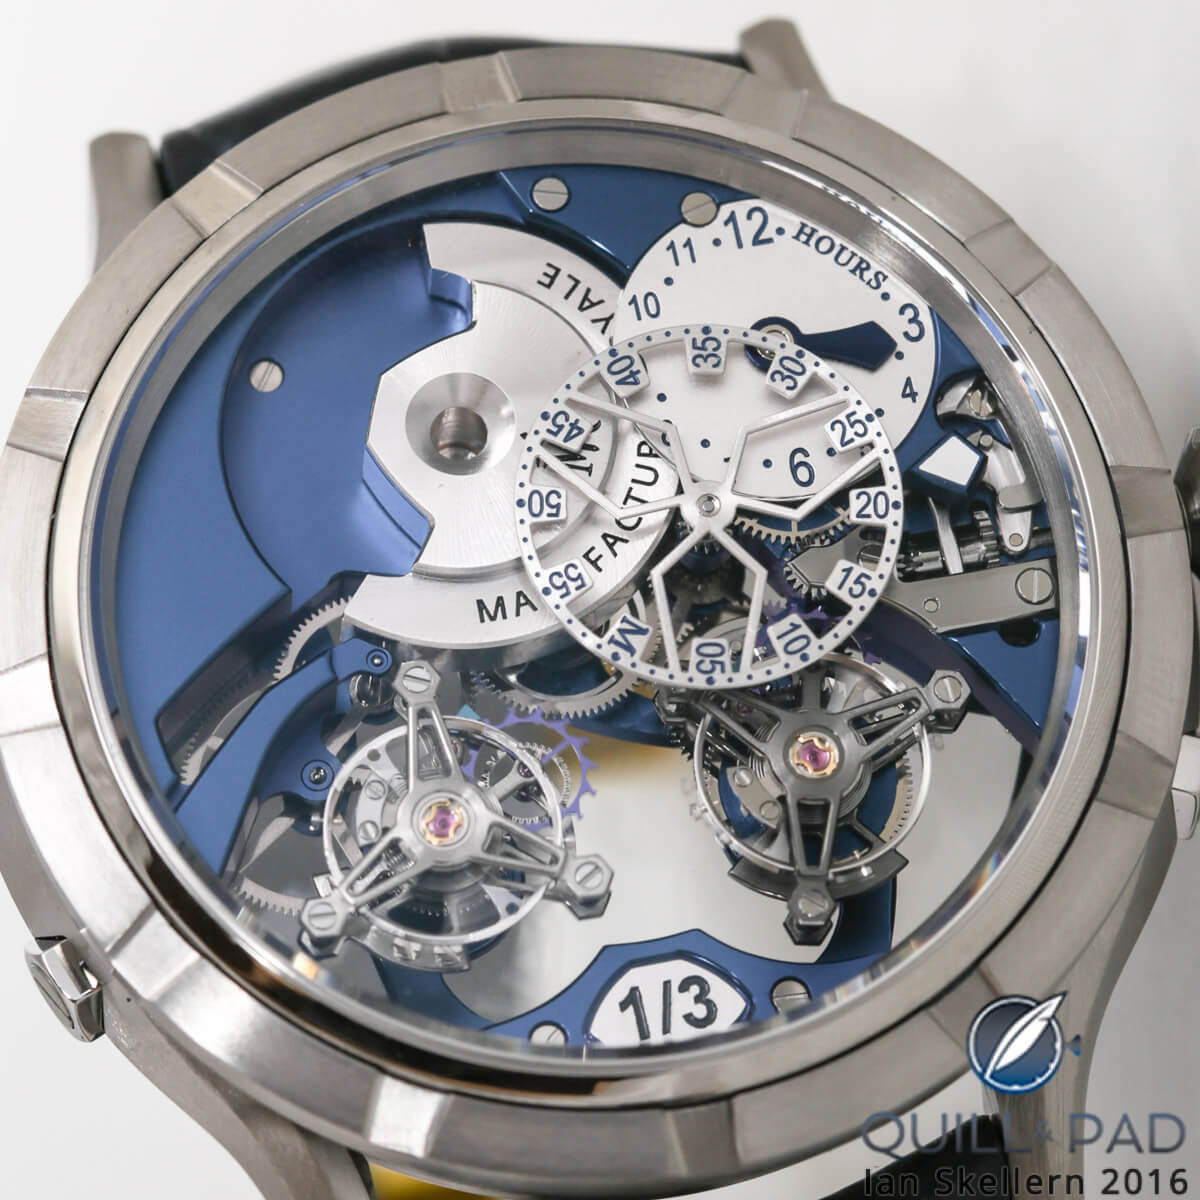 Manufacture Royale 1770 Micromégas Revolution in titanium with blue movement